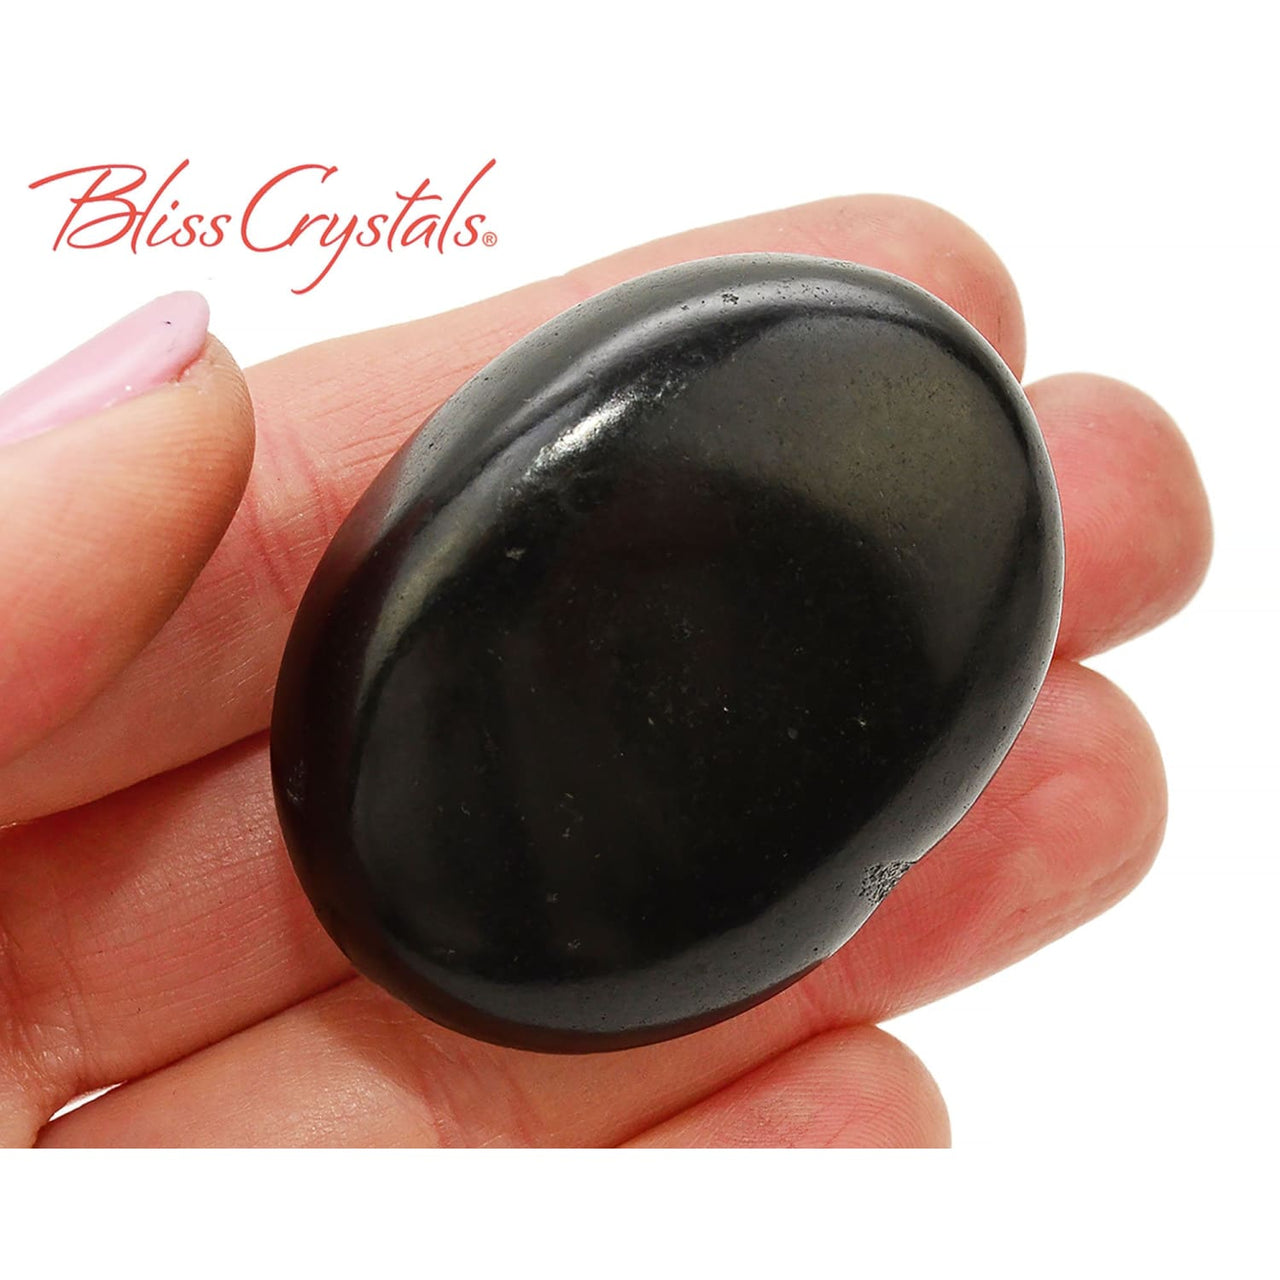 1 SHUNGITE Polished Pillow Palm Stone Healing Crystal and 